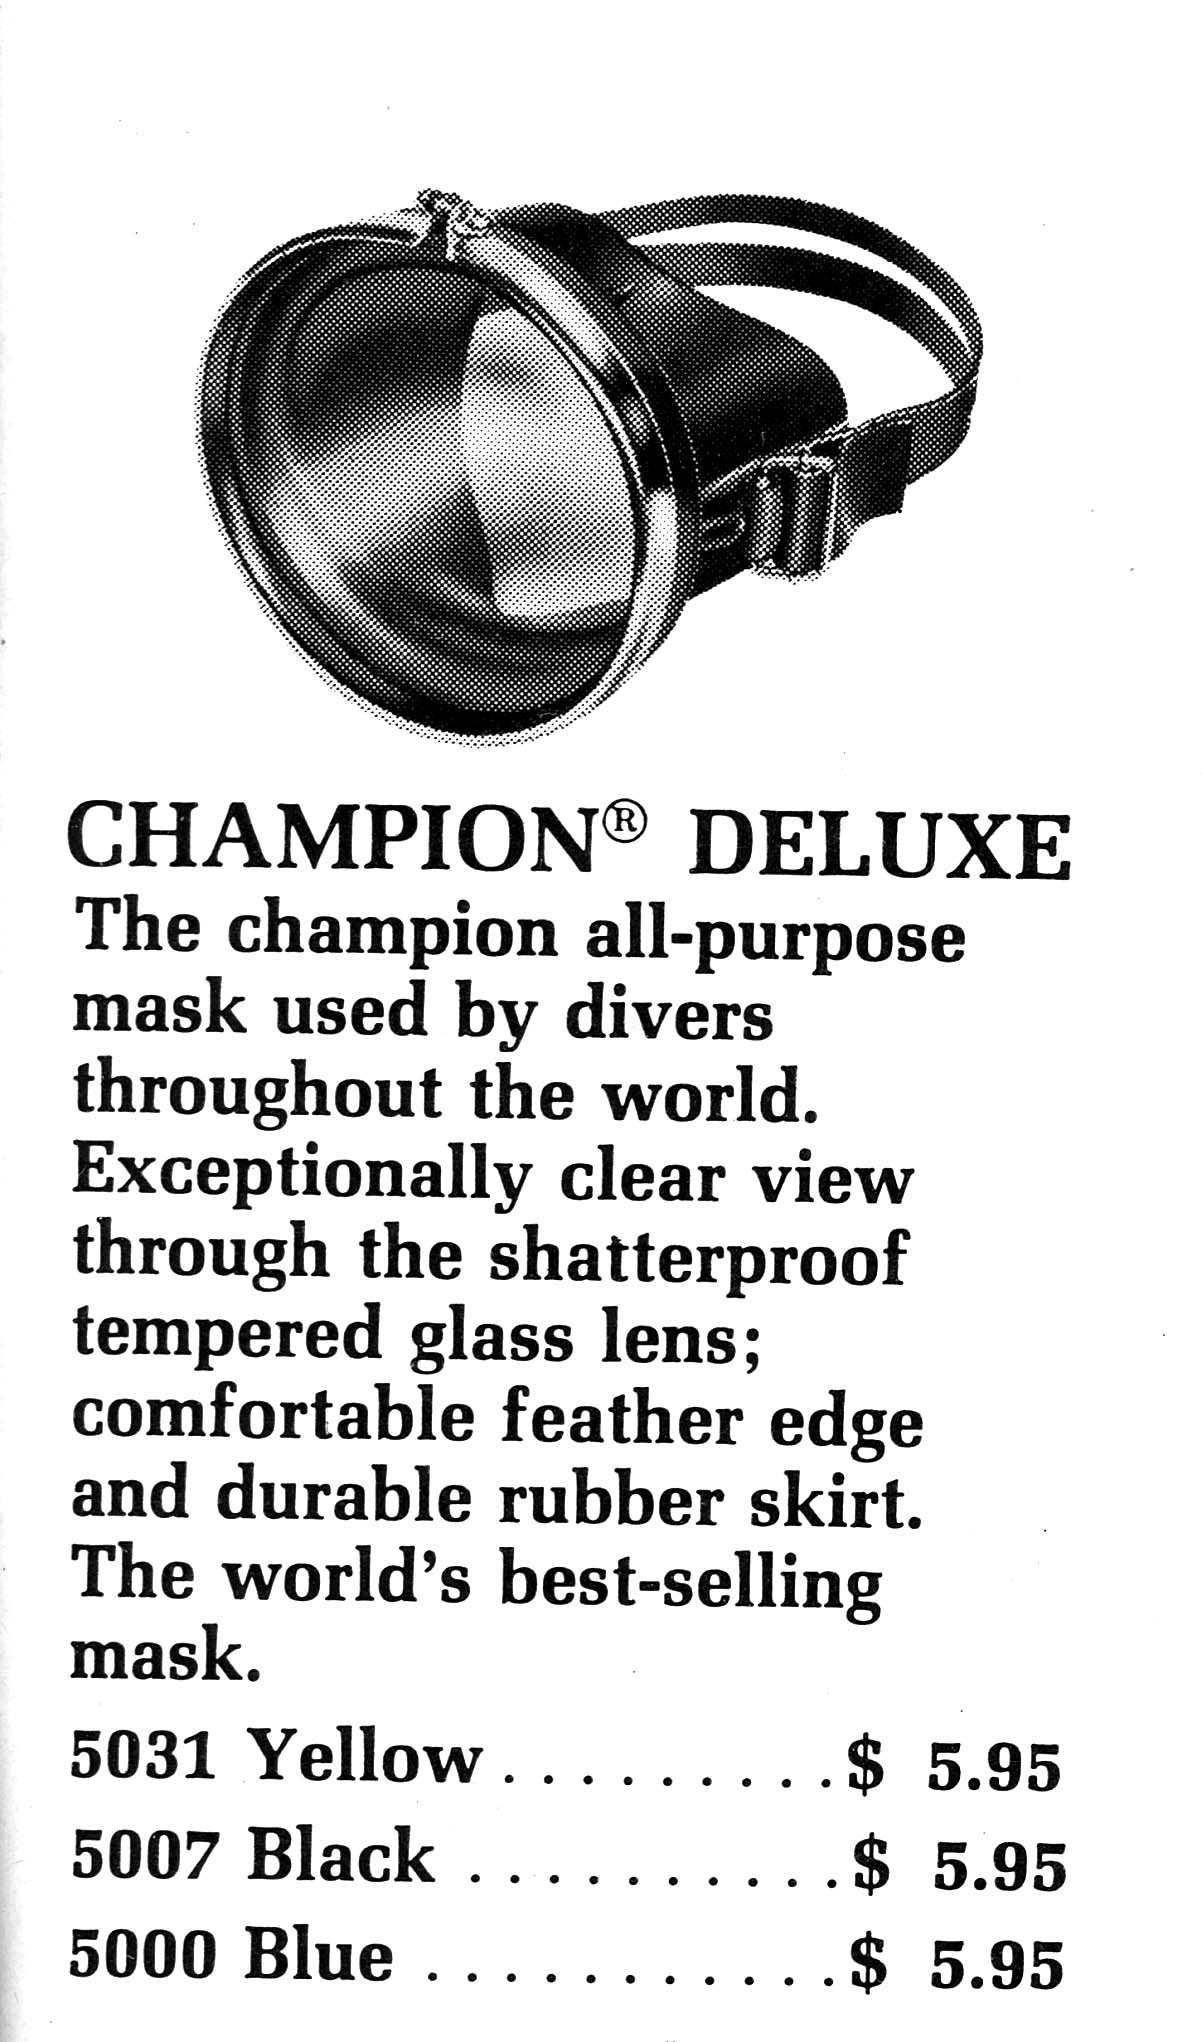 Champion Deluxe Mask